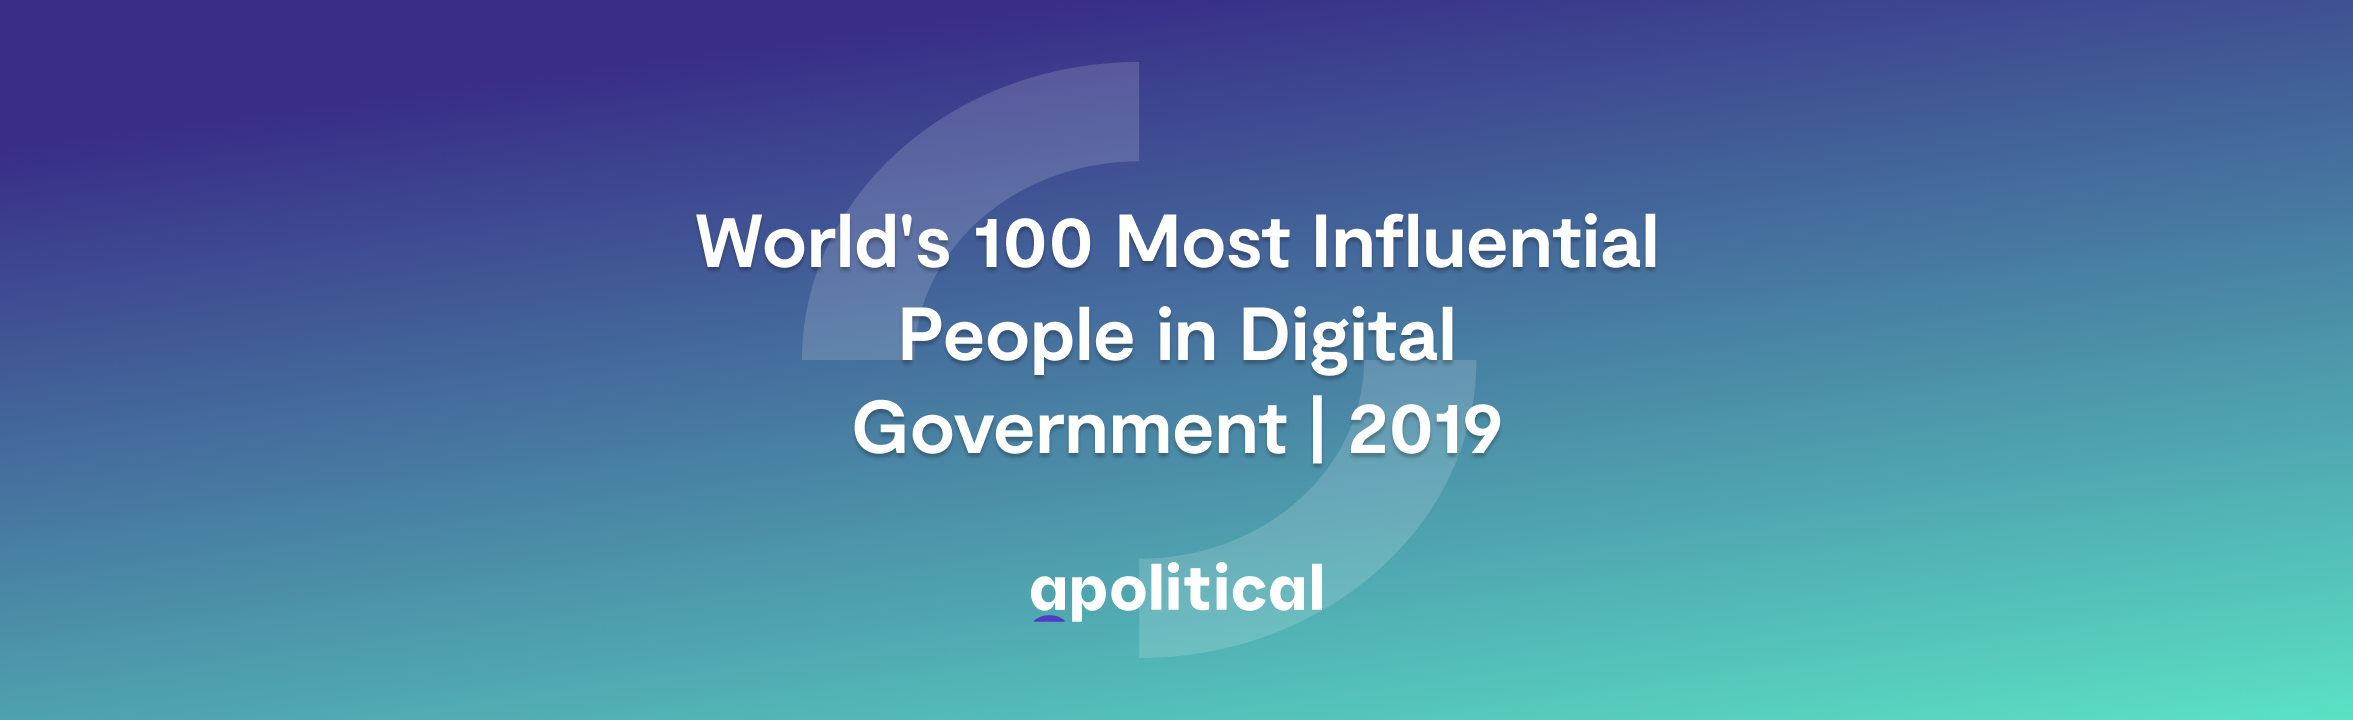 World's 100 Most Influential People in Digital Government